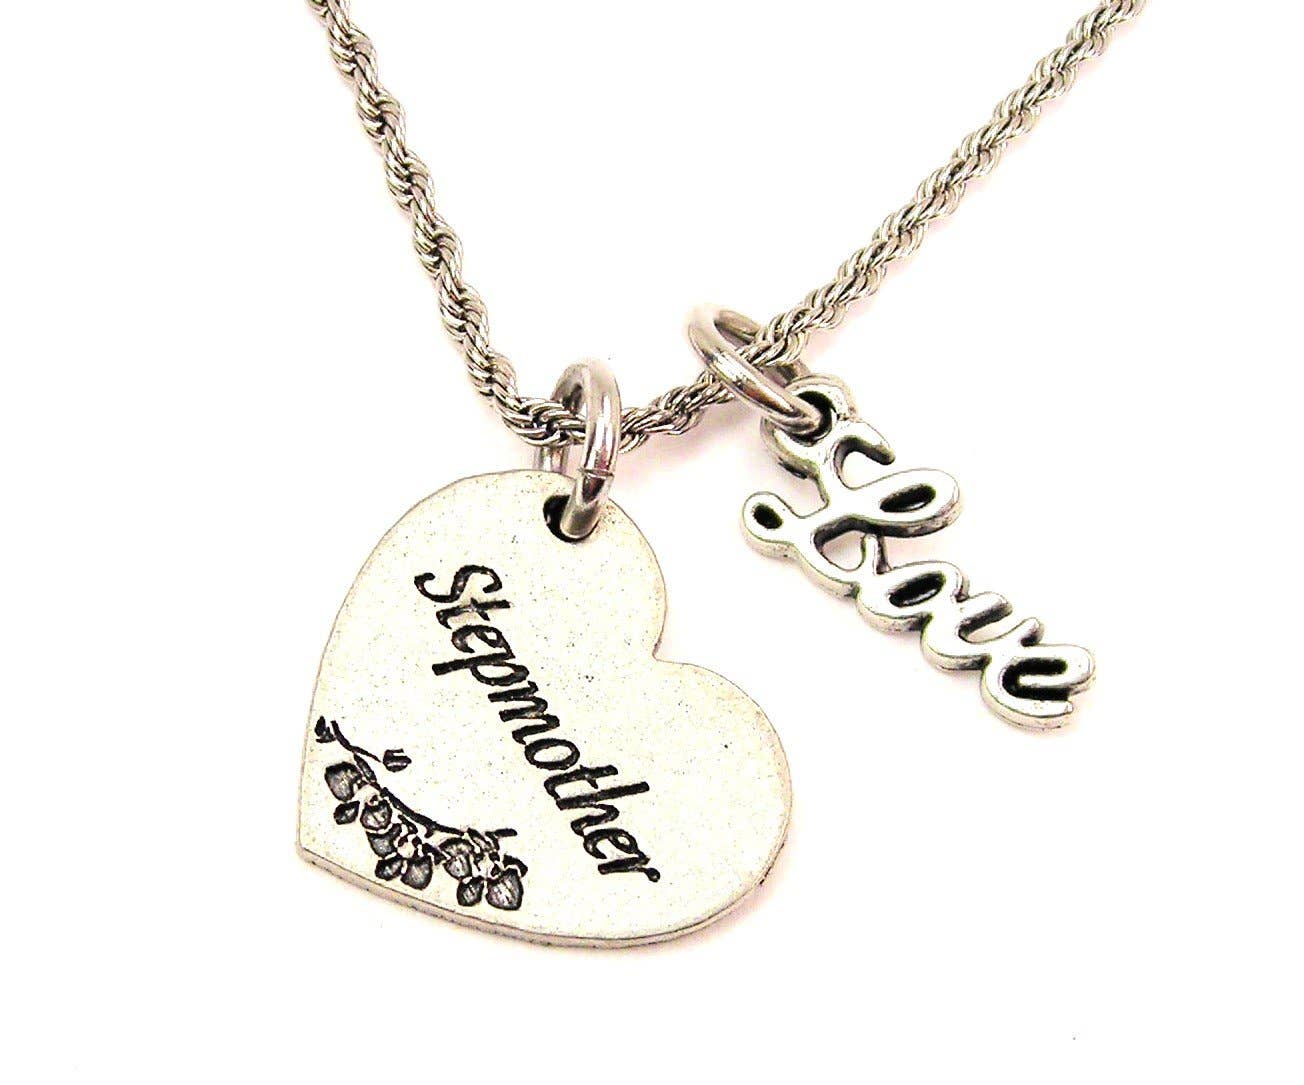 ChubbyChicoCharms Sacred Heart Stainless Steel Rope Chain Cursive Love Necklace 